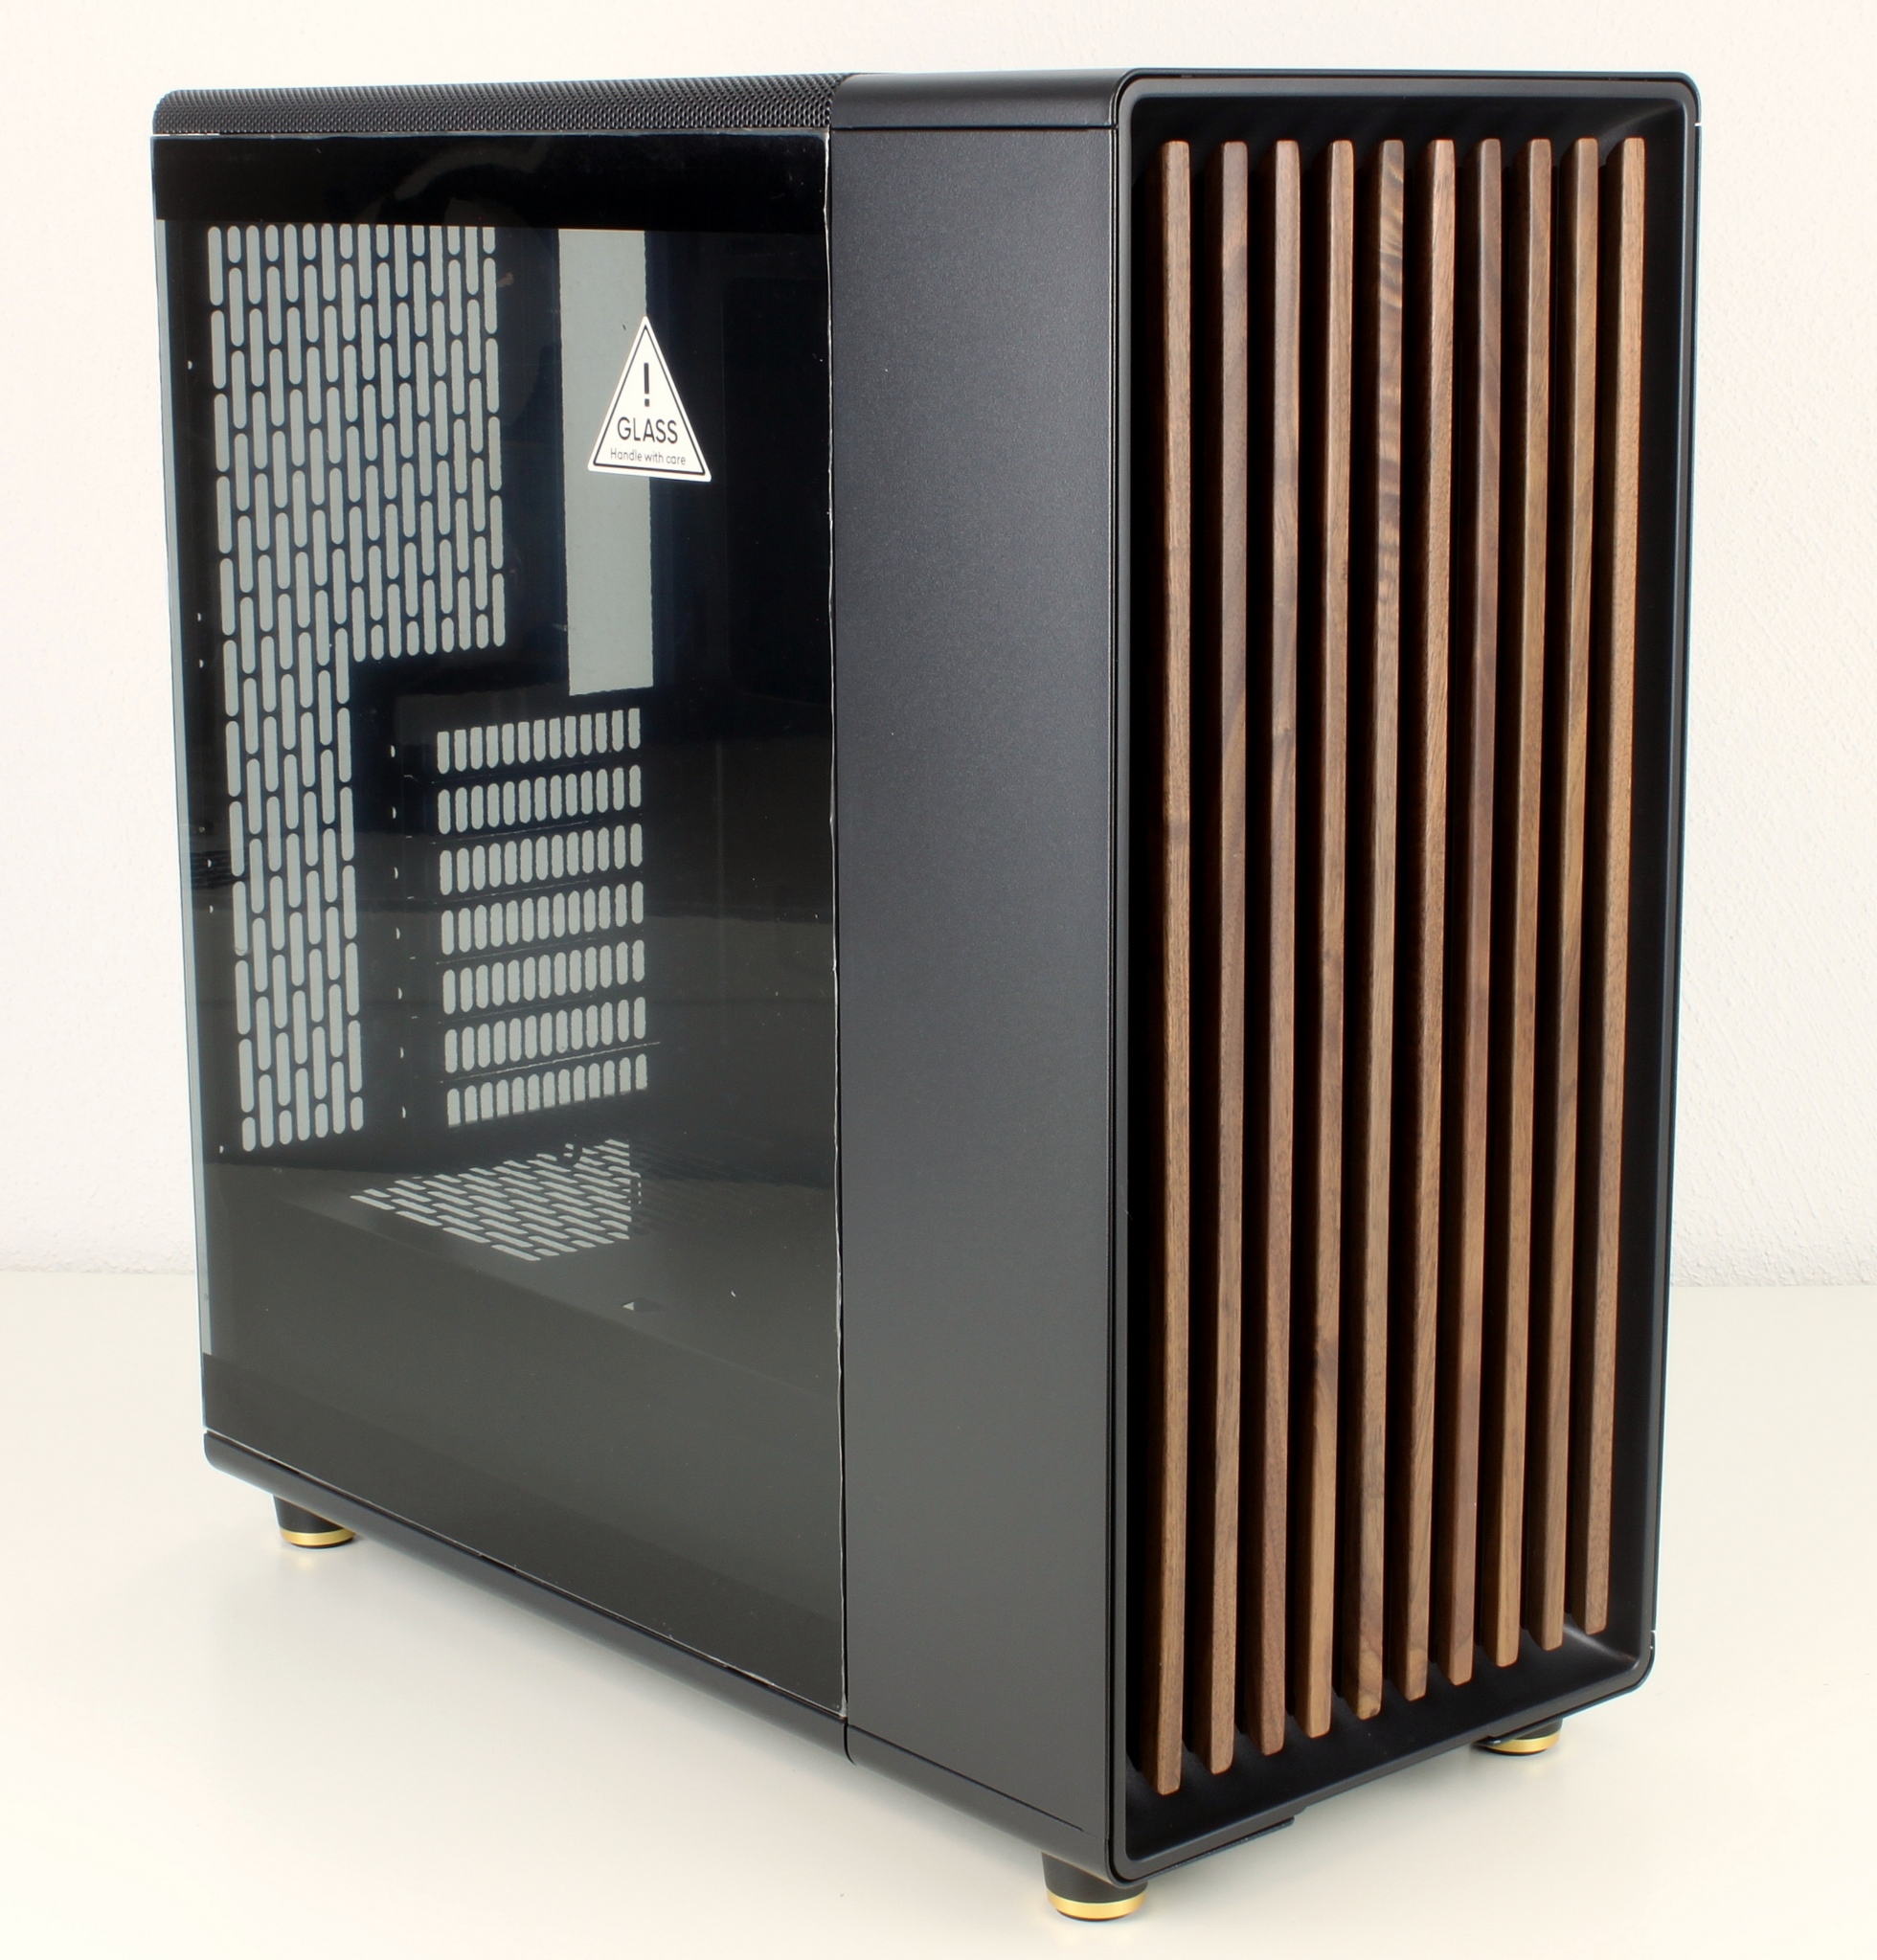 FRACTAL DESIGN North Review - Noble midi tower with wood applications  creates a whisky lounge feeling